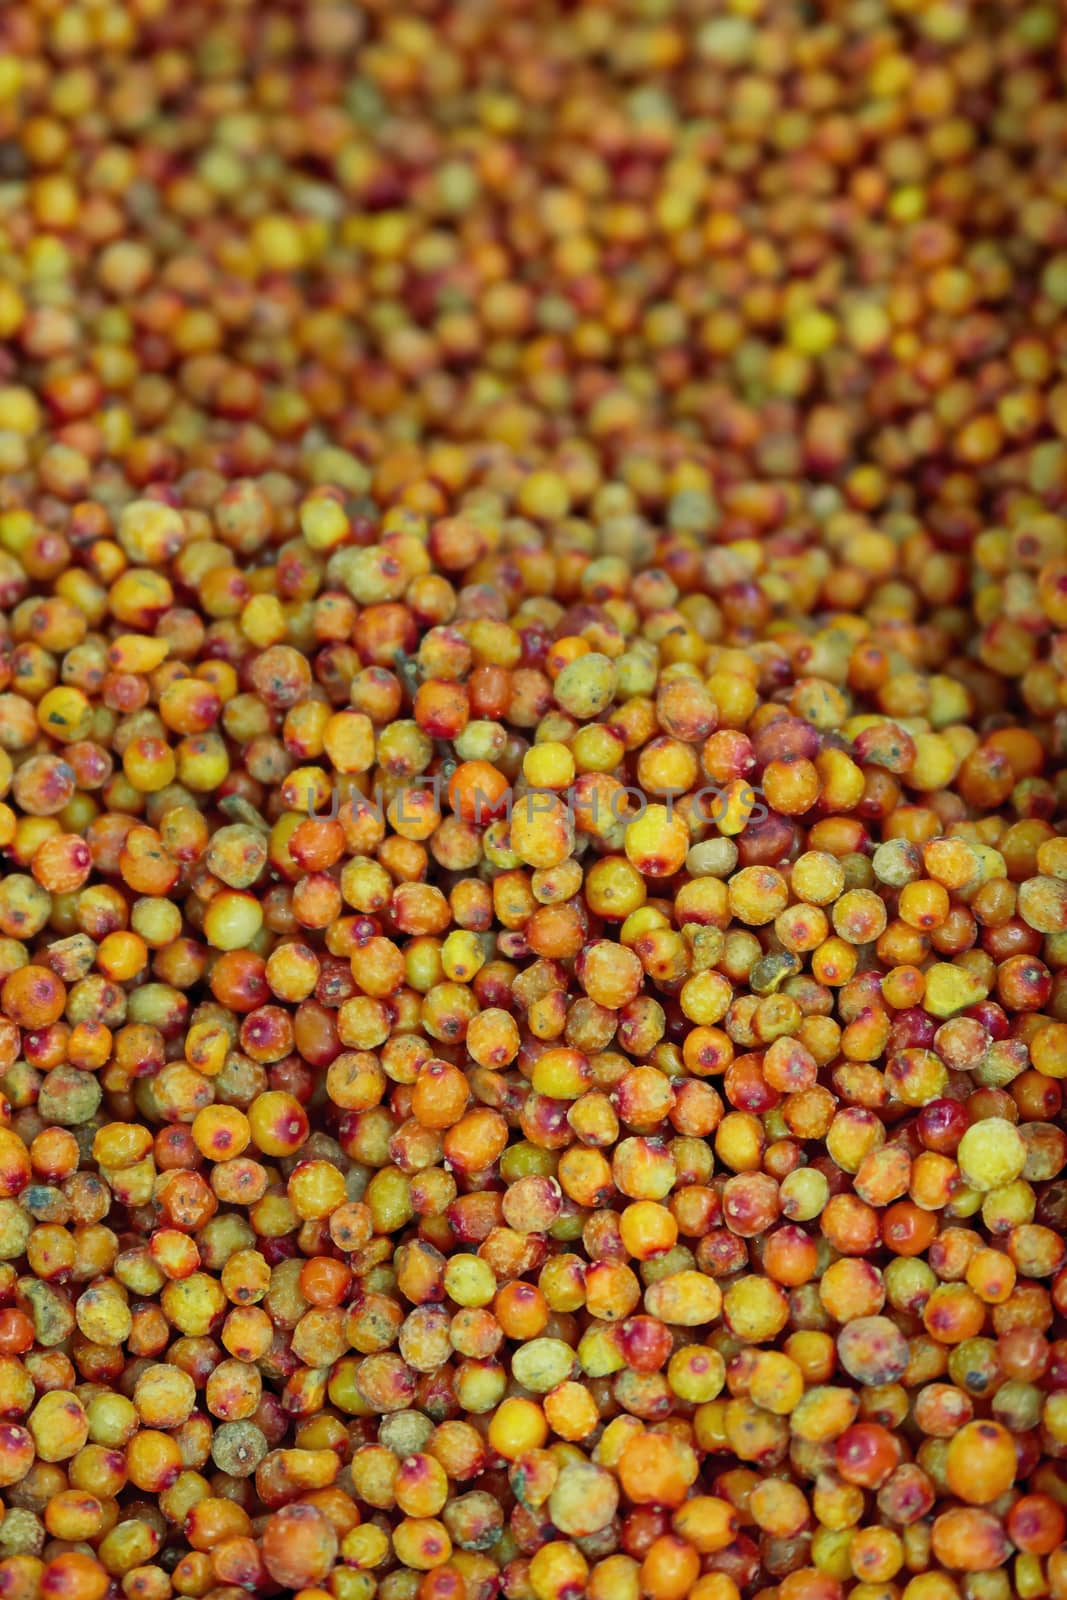 Frozen berries in grocery store shot close-up, blurred background. Bright yellow sea buckthorn berries.